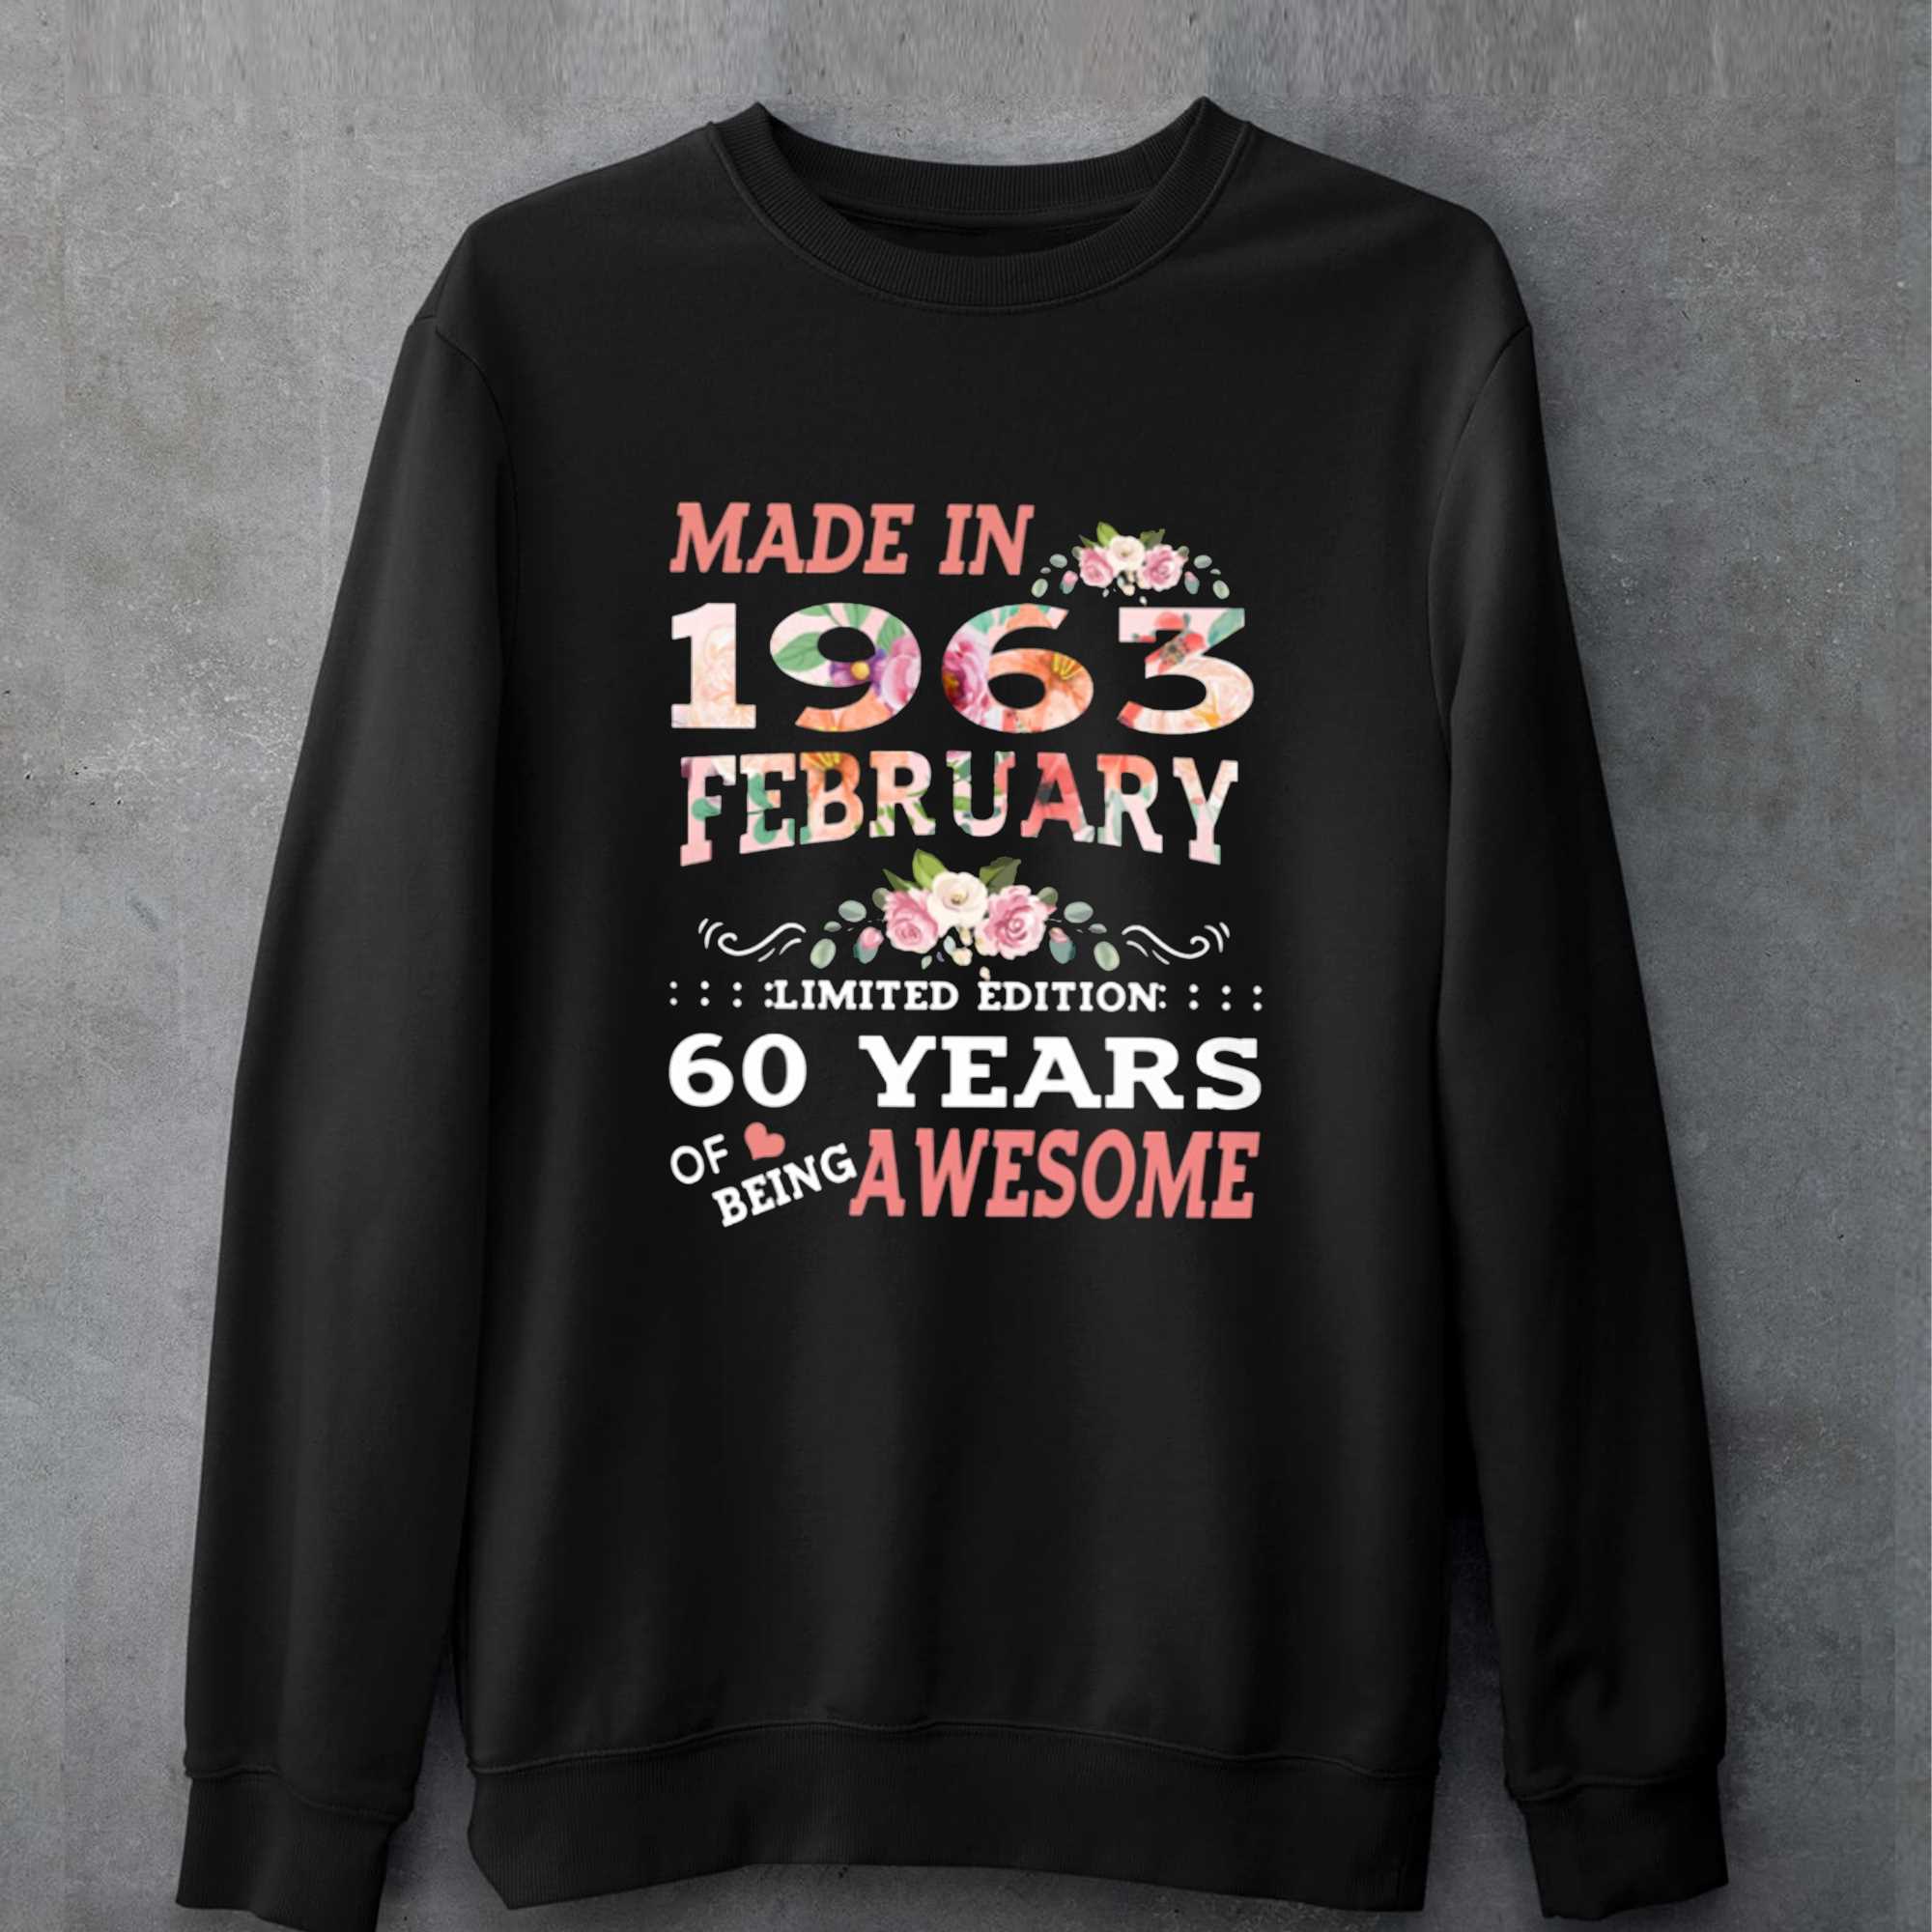 Made In 1963 February 60 Years Of Being Awesome T-shirt 